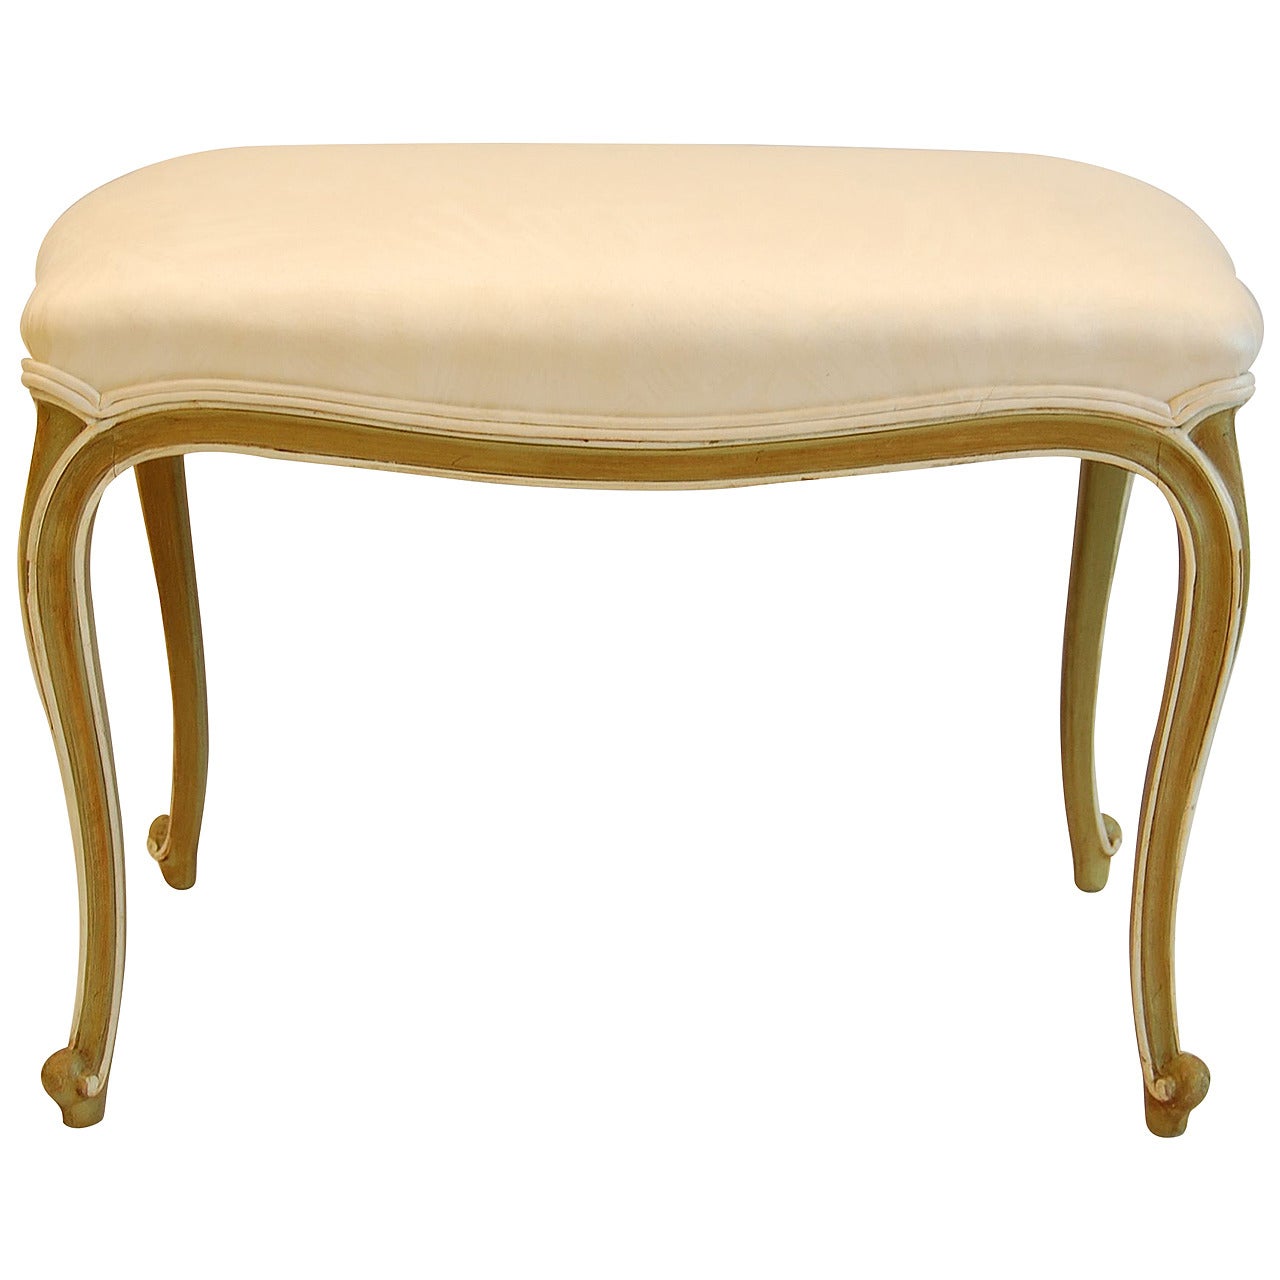 Celadon Painted French Style Tabouret